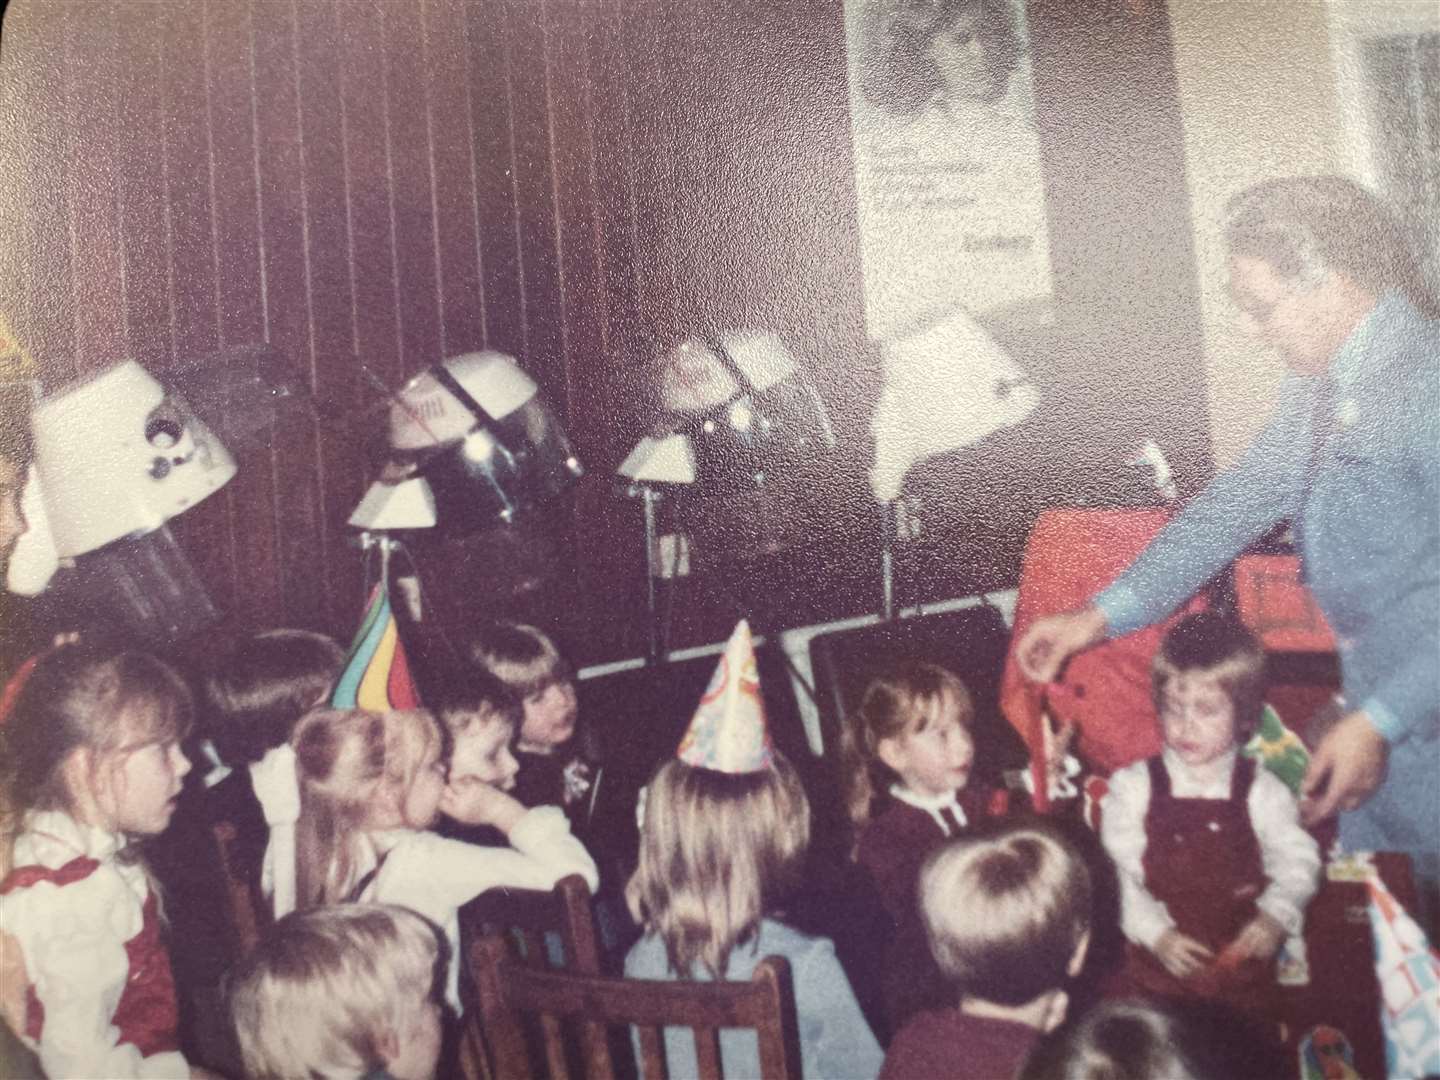 This picture of Irene's son's birthday party, which she hosted at the salon, shows the hood dryers that used to line one of the walls